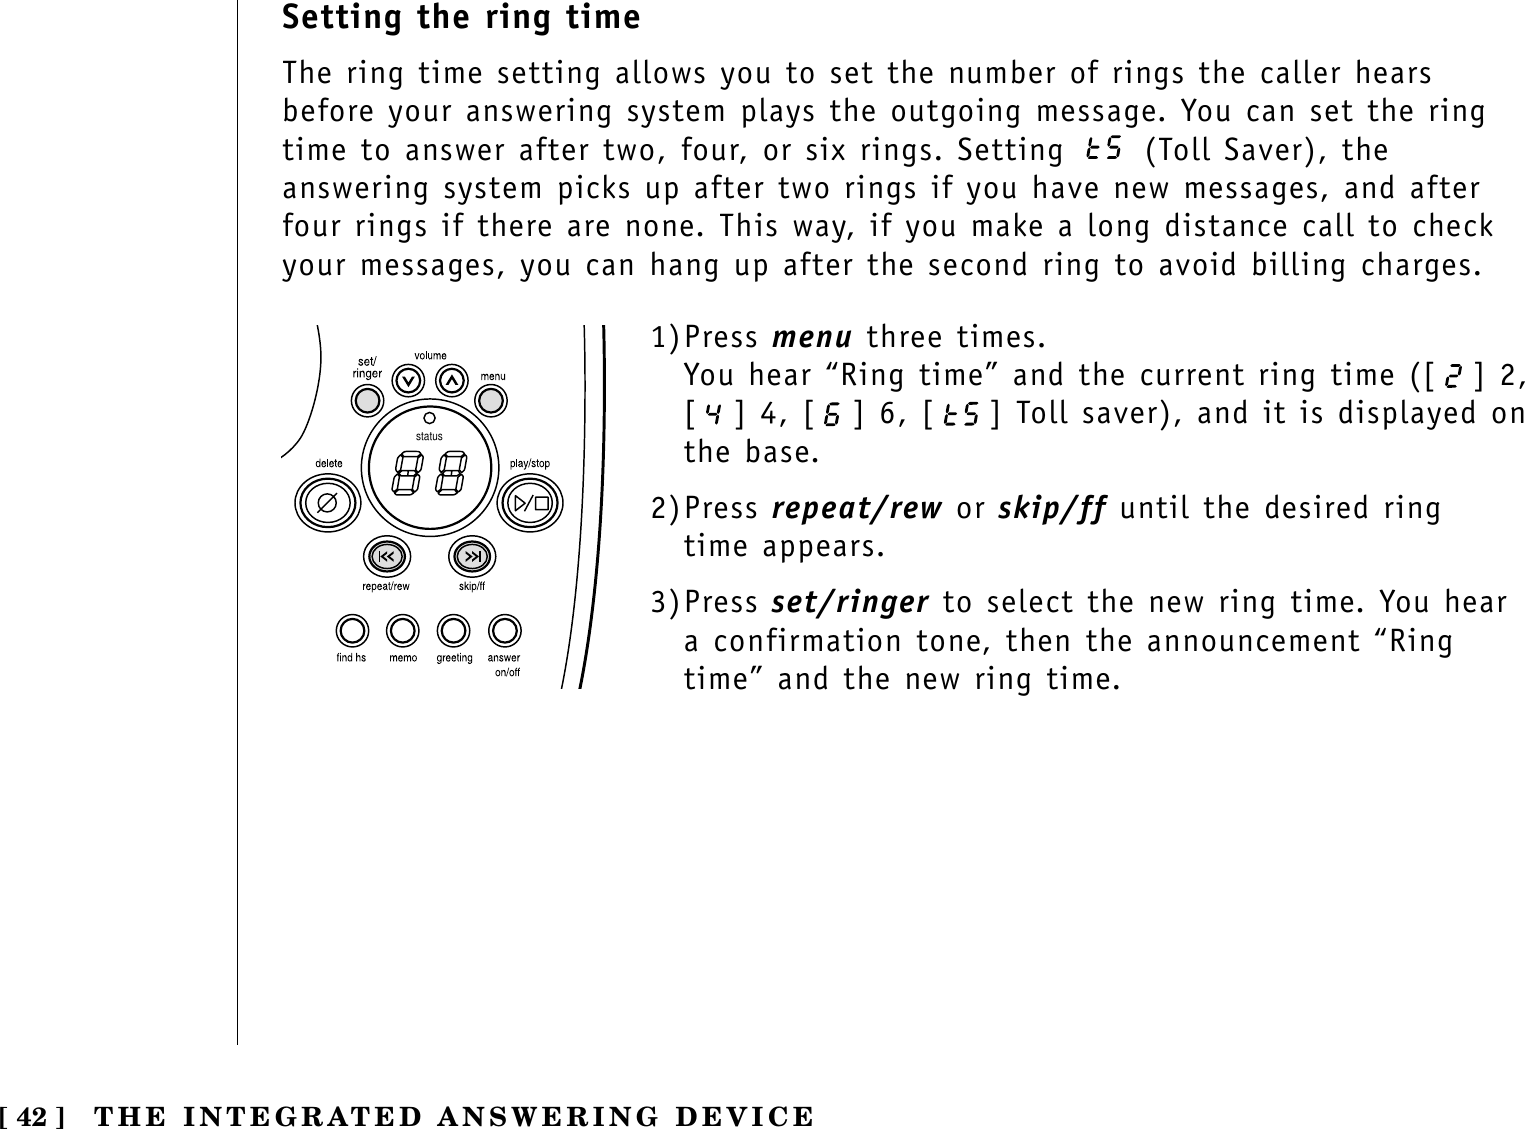 [ 42 ] THE INTEGRATED ANSWERING DEVICESetting the ring timeThe ring time setting allows you to set the number of rings the caller hearsbefore your answering system plays the outgoing message. You can set the ringtime to answer after two, four, or six rings. Setting  (Toll Saver), theanswering system picks up after two rings if you have new messages, and afterfour rings if there are none. This way, if you make a long distance call to checkyour messages, you can hang up after the second ring to avoid billing charges.status1)Press menu three times.You hear “Ring time” and the current ring time ([ ] 2,[ ] 4, [ ] 6, [ ] Toll saver), and it is displayed onthe base.2)Press repeat/rew or skip/ff until the desired ring time appears.3)Press set/ringer to select the new ring time. You heara confirmation tone, then the announcement “Ringtime” and the new ring time.